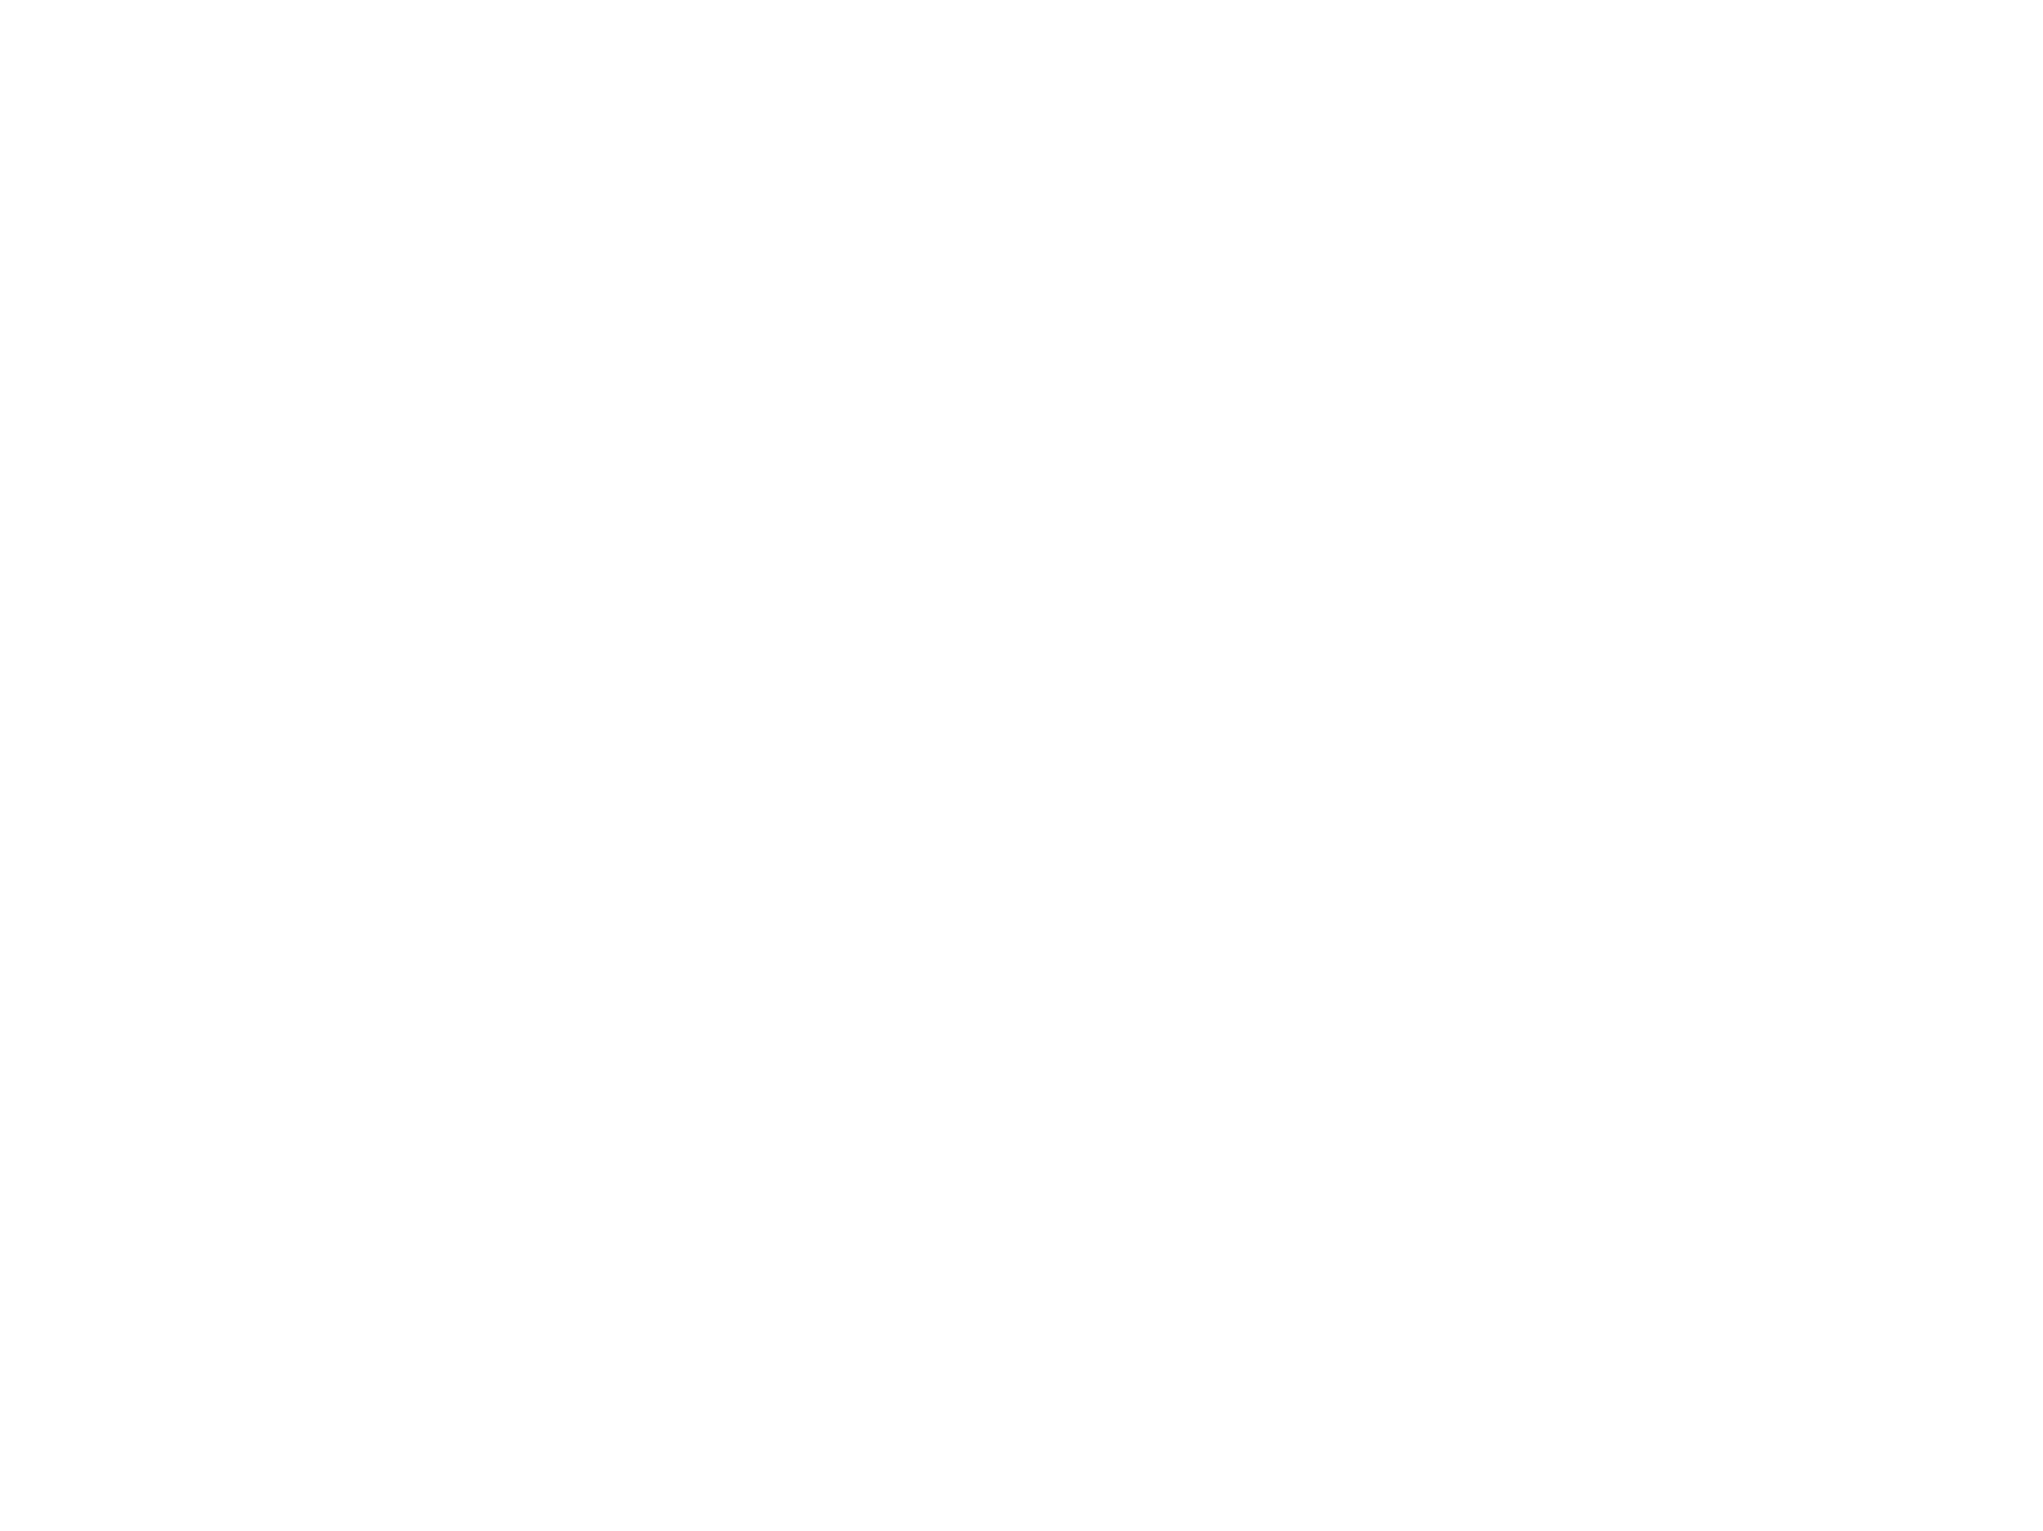 GS E-Learning & Training